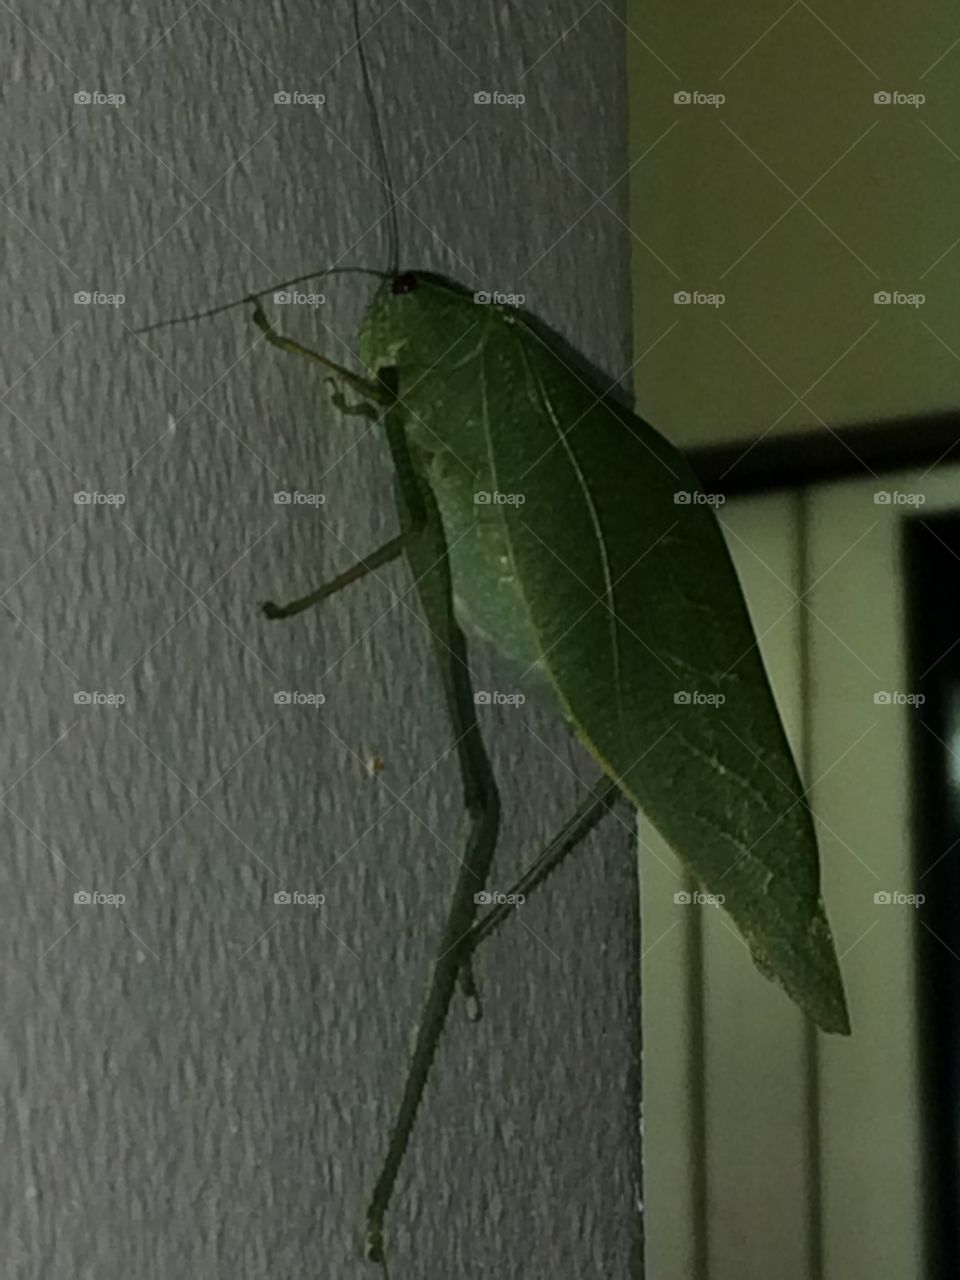 Awesome insect